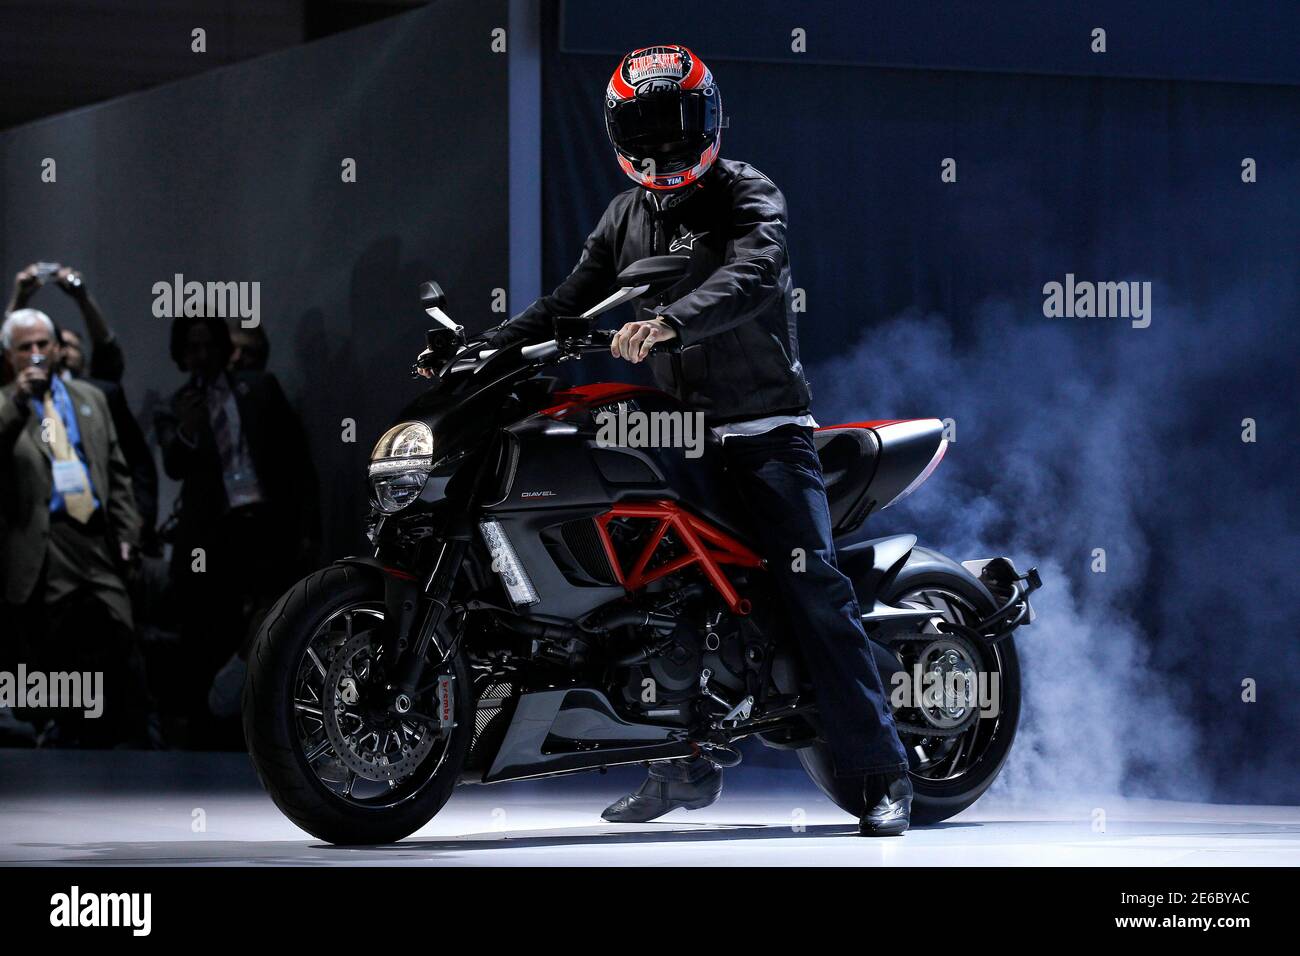 Professional motorcycle racer Nicky Hayden rides a Ducati Diavel Carbon at the LA Auto Show in Los Angeles November 17, 2010.  REUTERS/Mario Anzuoni (UNITED STATESBUSINESS TRANSPORT - Tags: TRANSPORT BUSINESS SPORT MOTOR RACING) Stock Photo